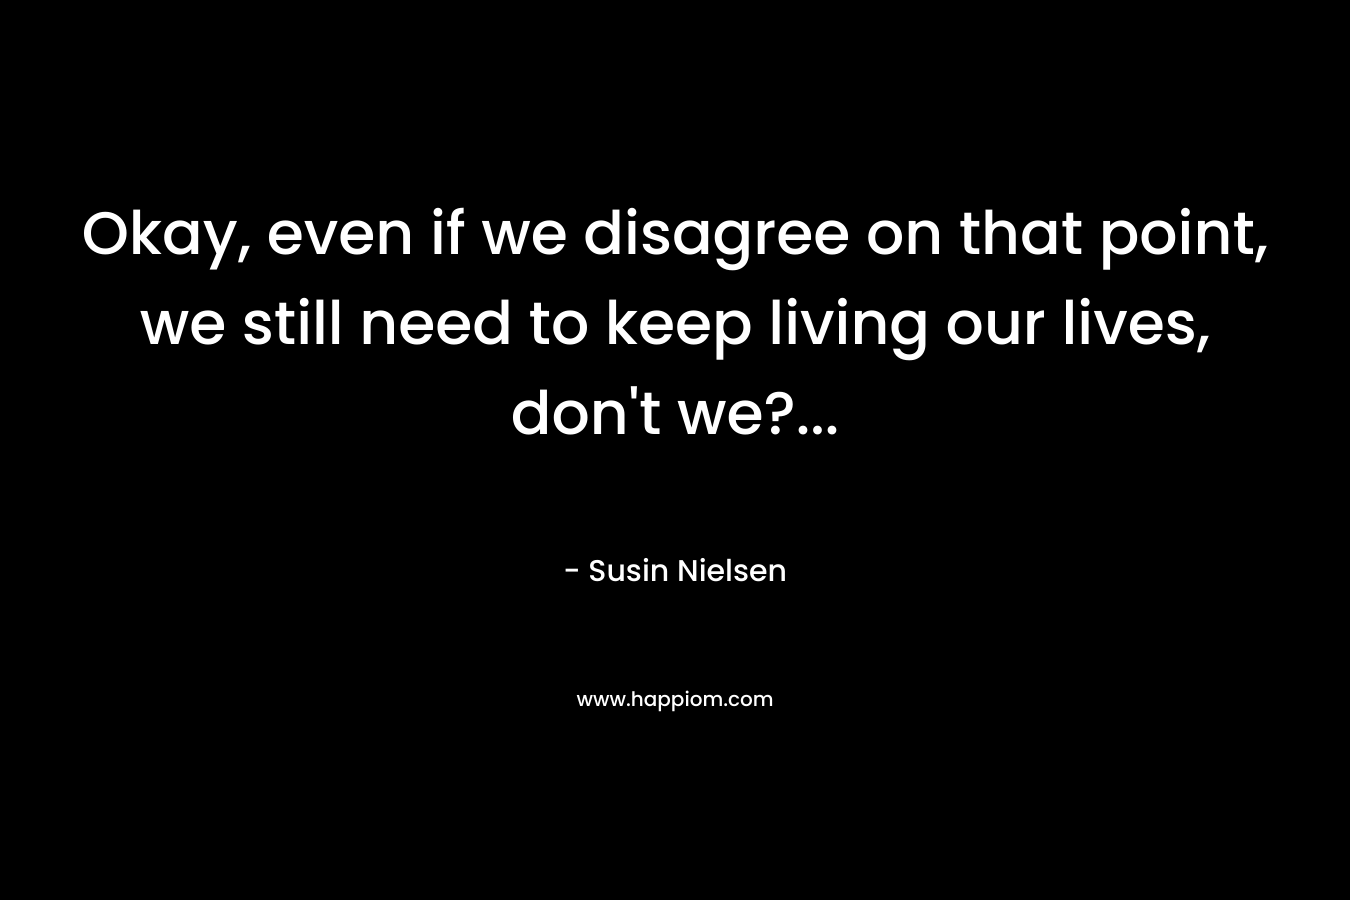 Okay, even if we disagree on that point, we still need to keep living our lives, don’t we?… – Susin Nielsen